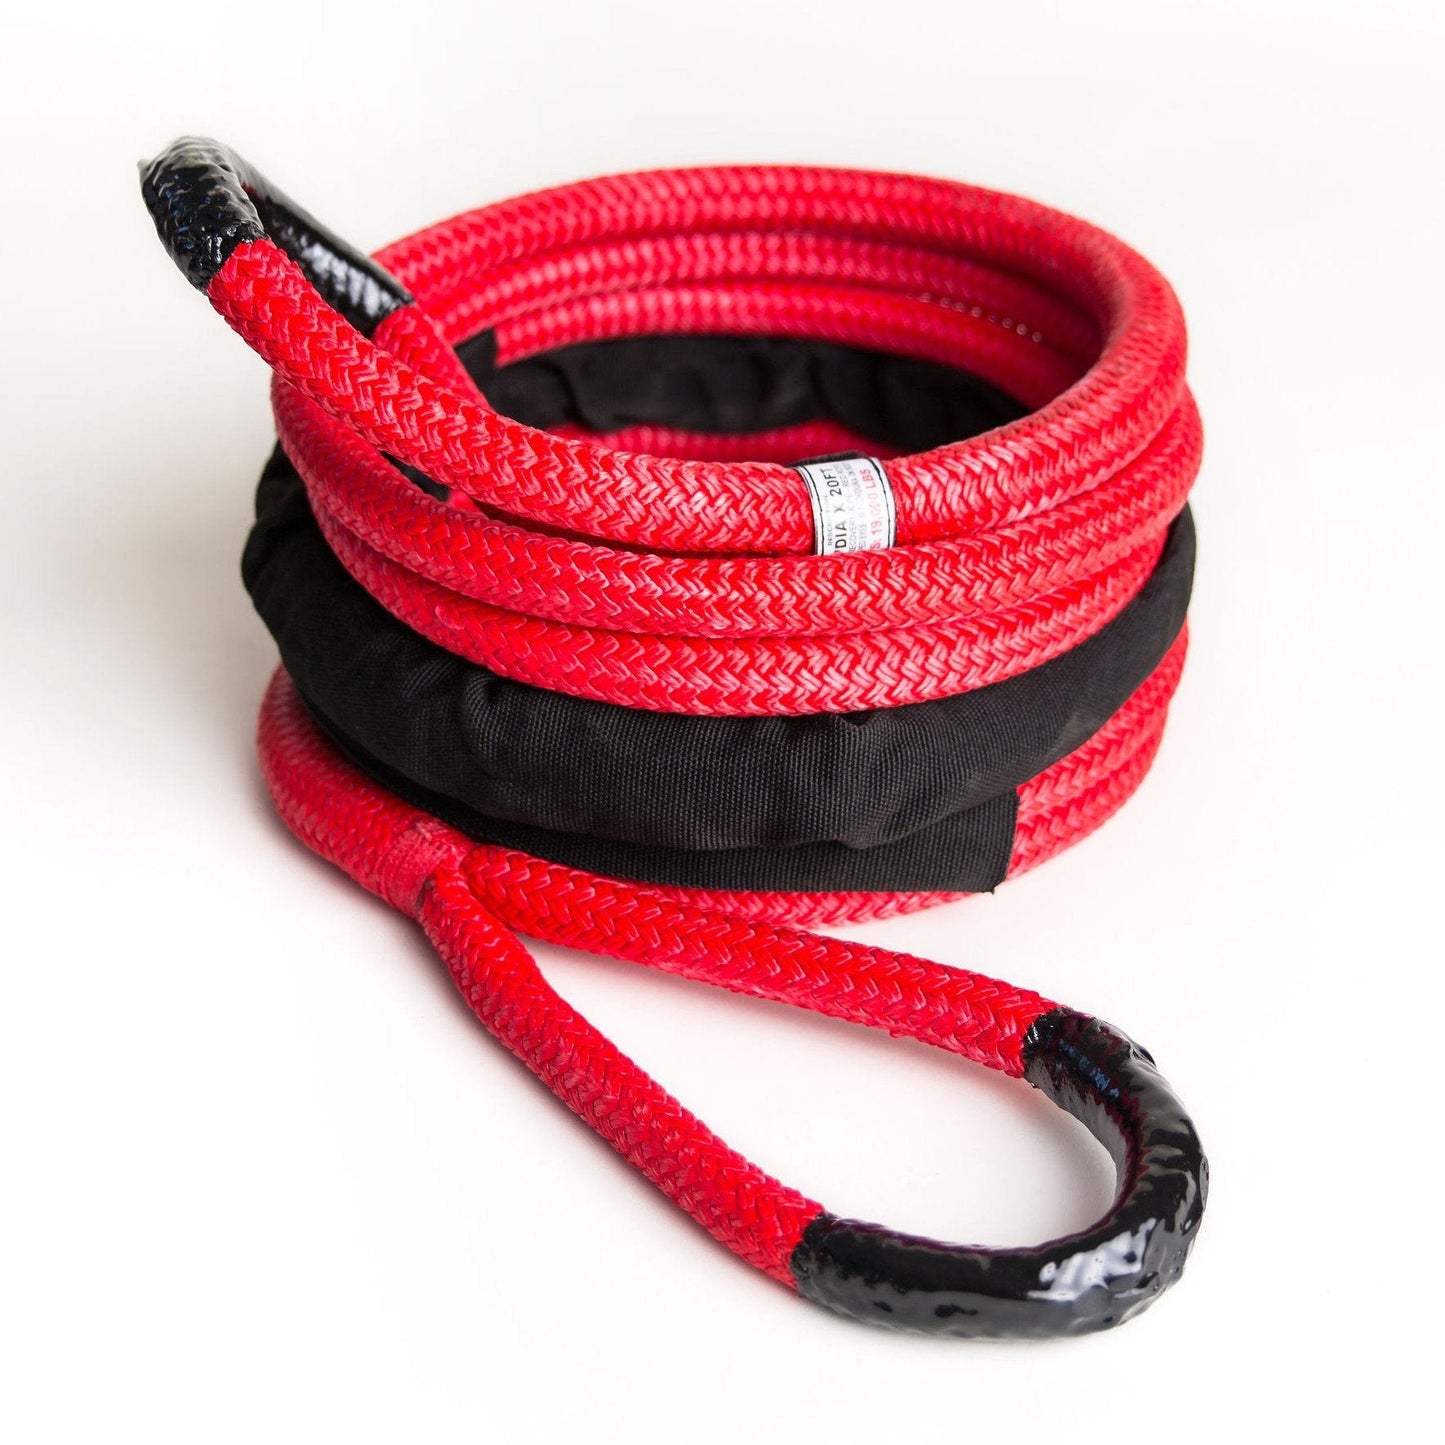 3/4" Kinetic Recovery Rope "Rubber Boa" [WLL 3,800-5,400 lbs]  [MBS 19,000 lbs]